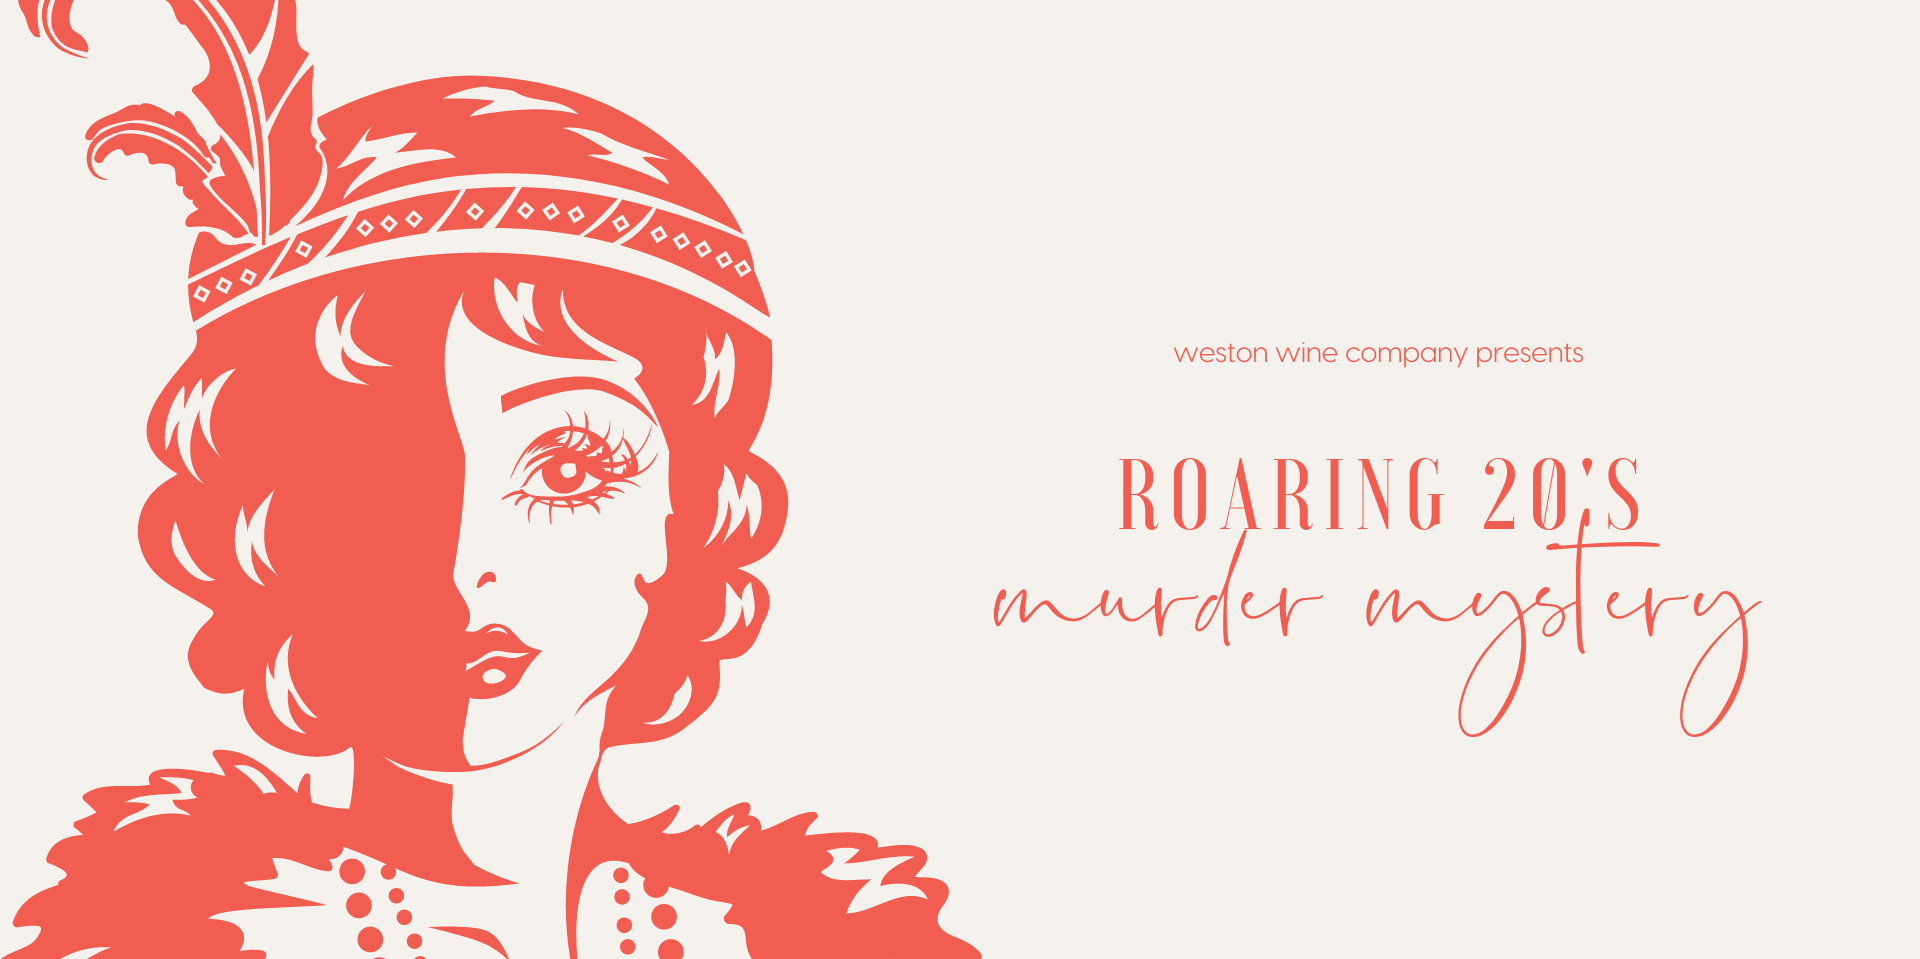 Roaring 20s Murder Mystery  promotional image